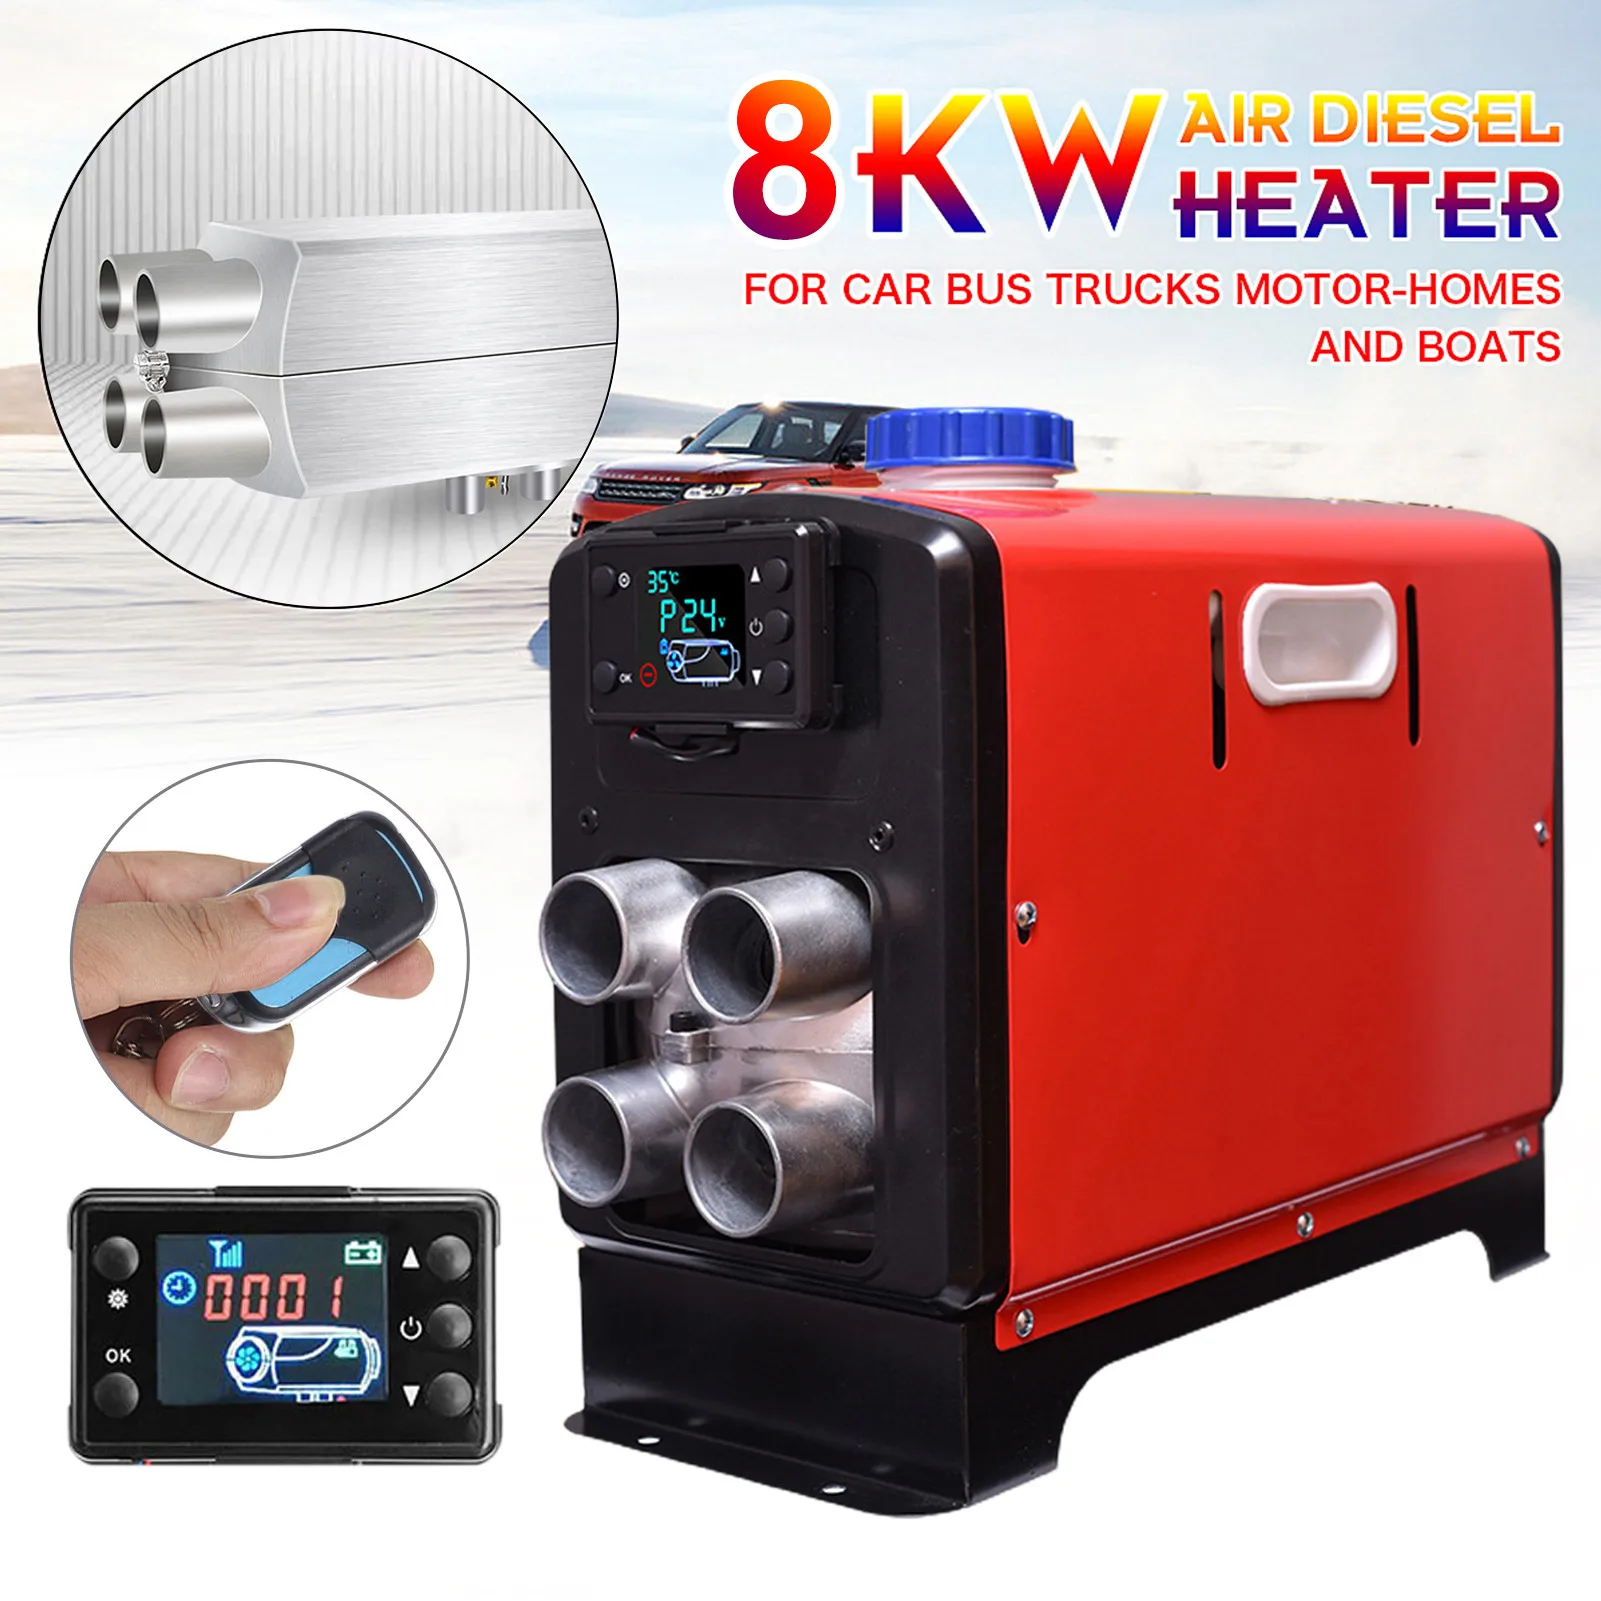 SCITOO 12V 8KW Diesel Air Heater Parking Heater with LCD Thermostat Environmental Protection Economy Quiet for Various Diesel Mechanical Vehicles,Buses,RVs,Trucks,Engineering Vehicles,etc 